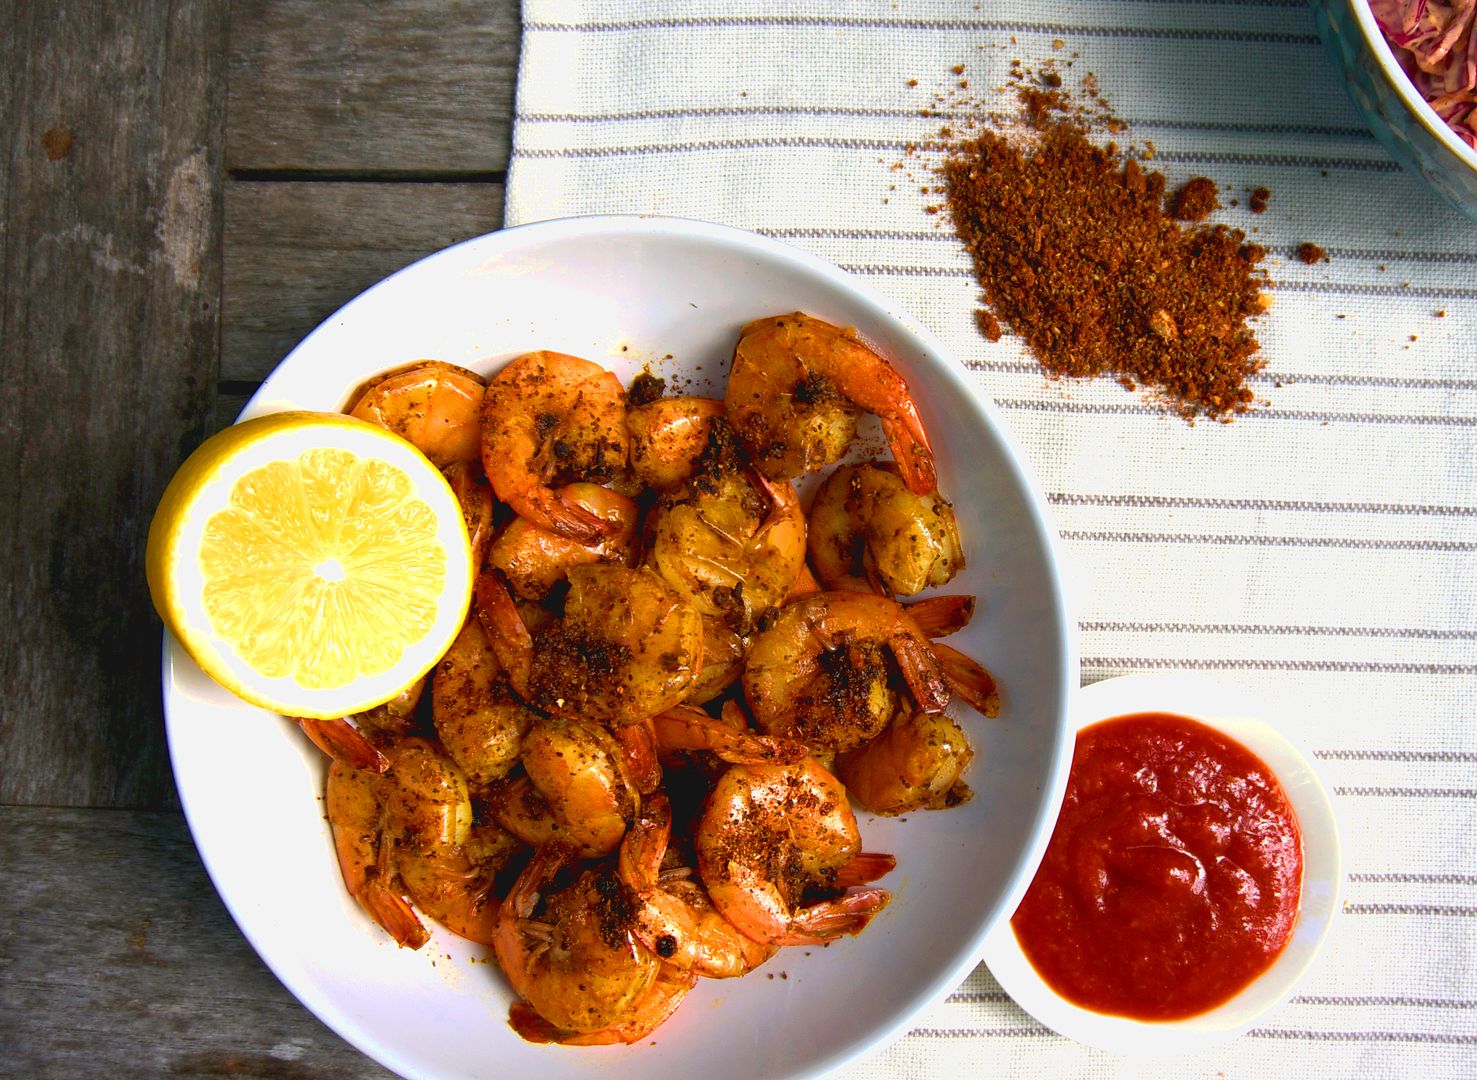 Raw Spice Bar spice of the month club delivers 3 spice blends every month, with recipes like Baltimore Spiced Shrimp